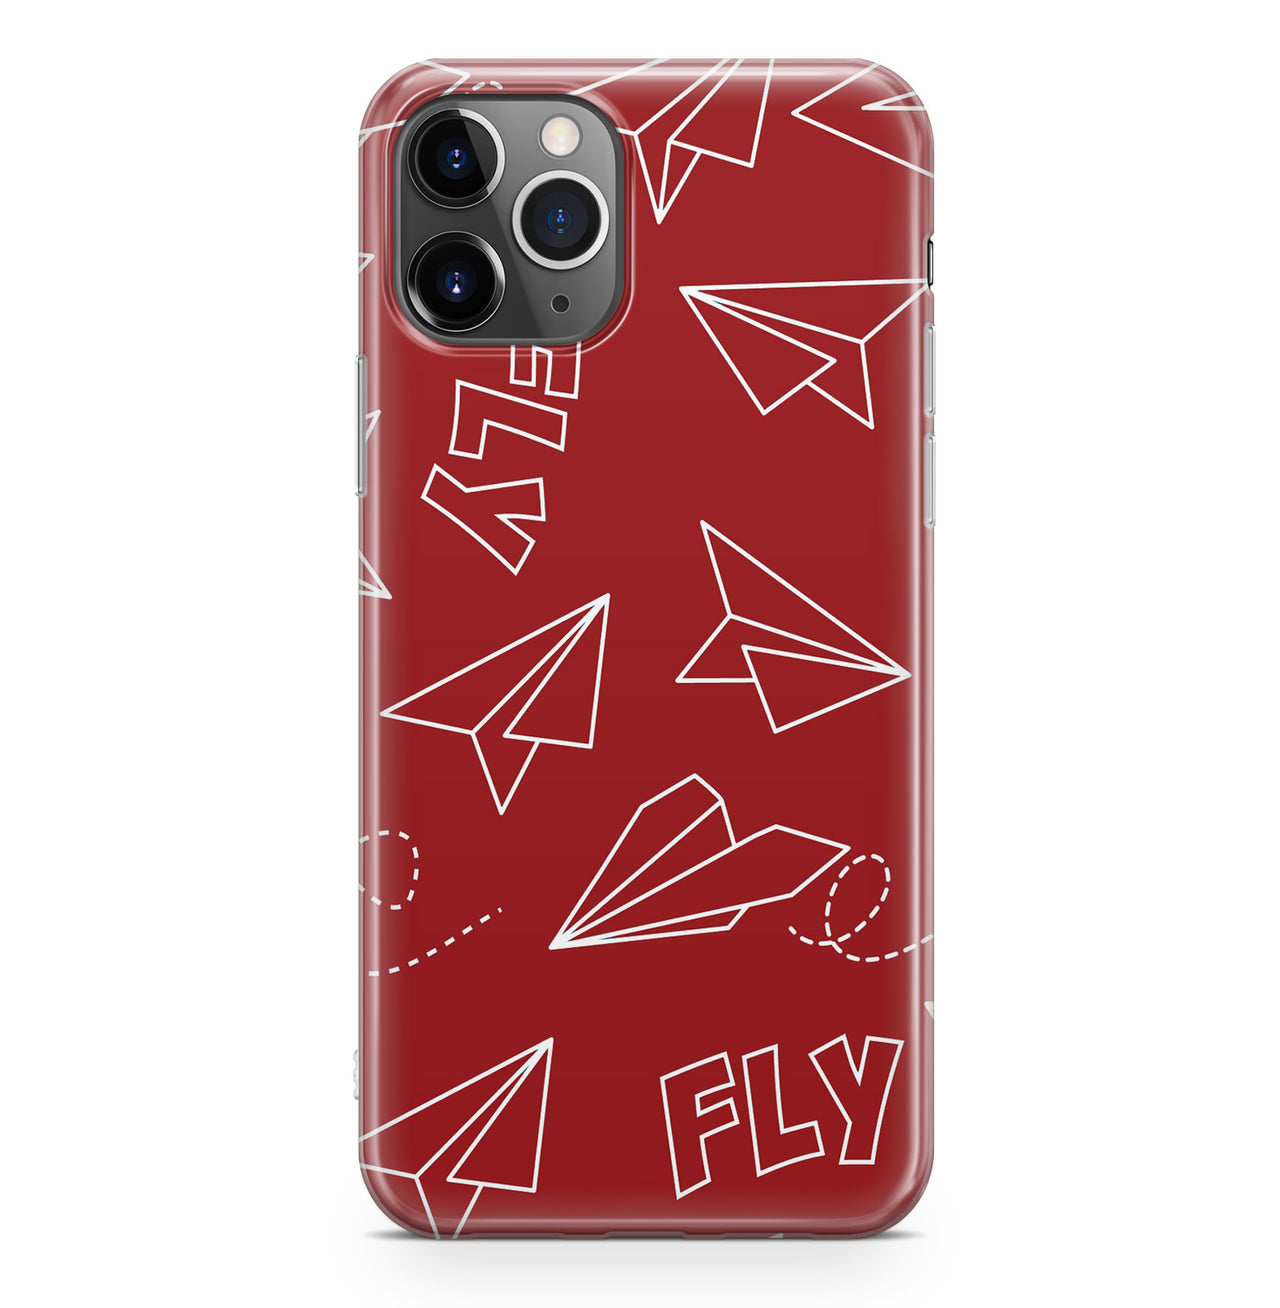 Paper Airplane & Fly-Red Designed iPhone Cases